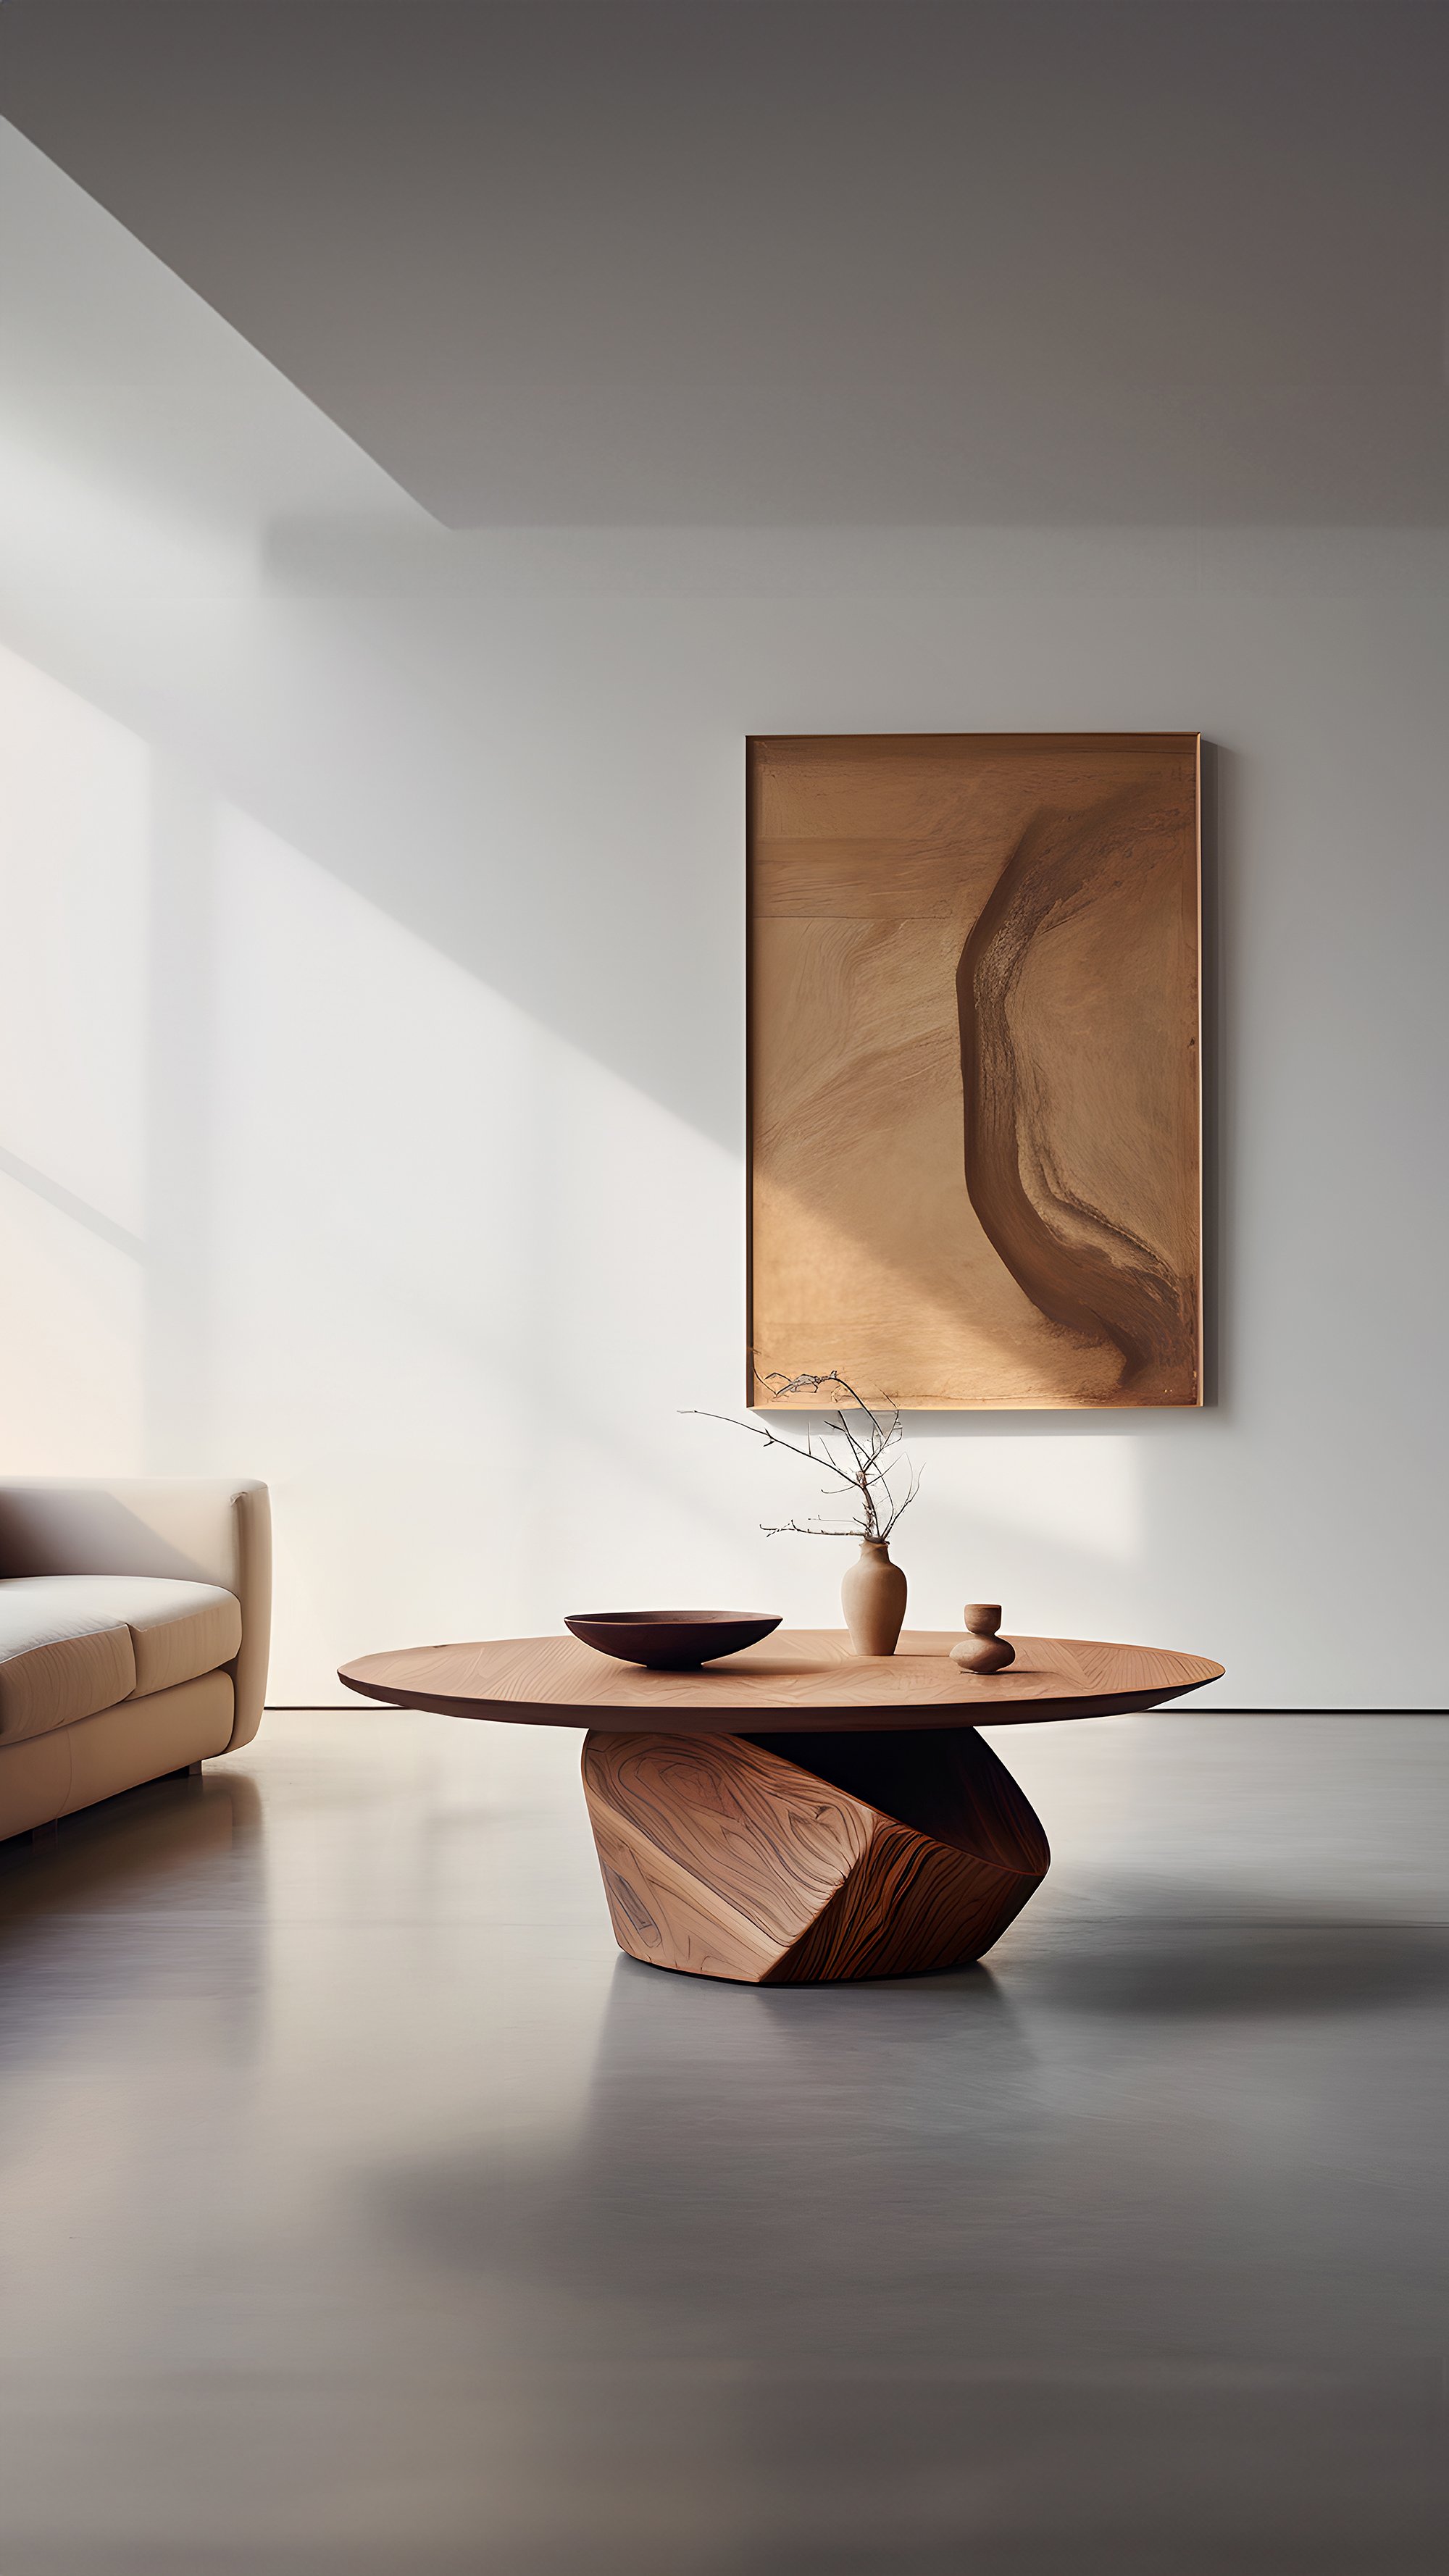 Sculptural Coffee Table Made of Solid Wood, Center Table Solace S35 by Joel Escalona — 7.jpg